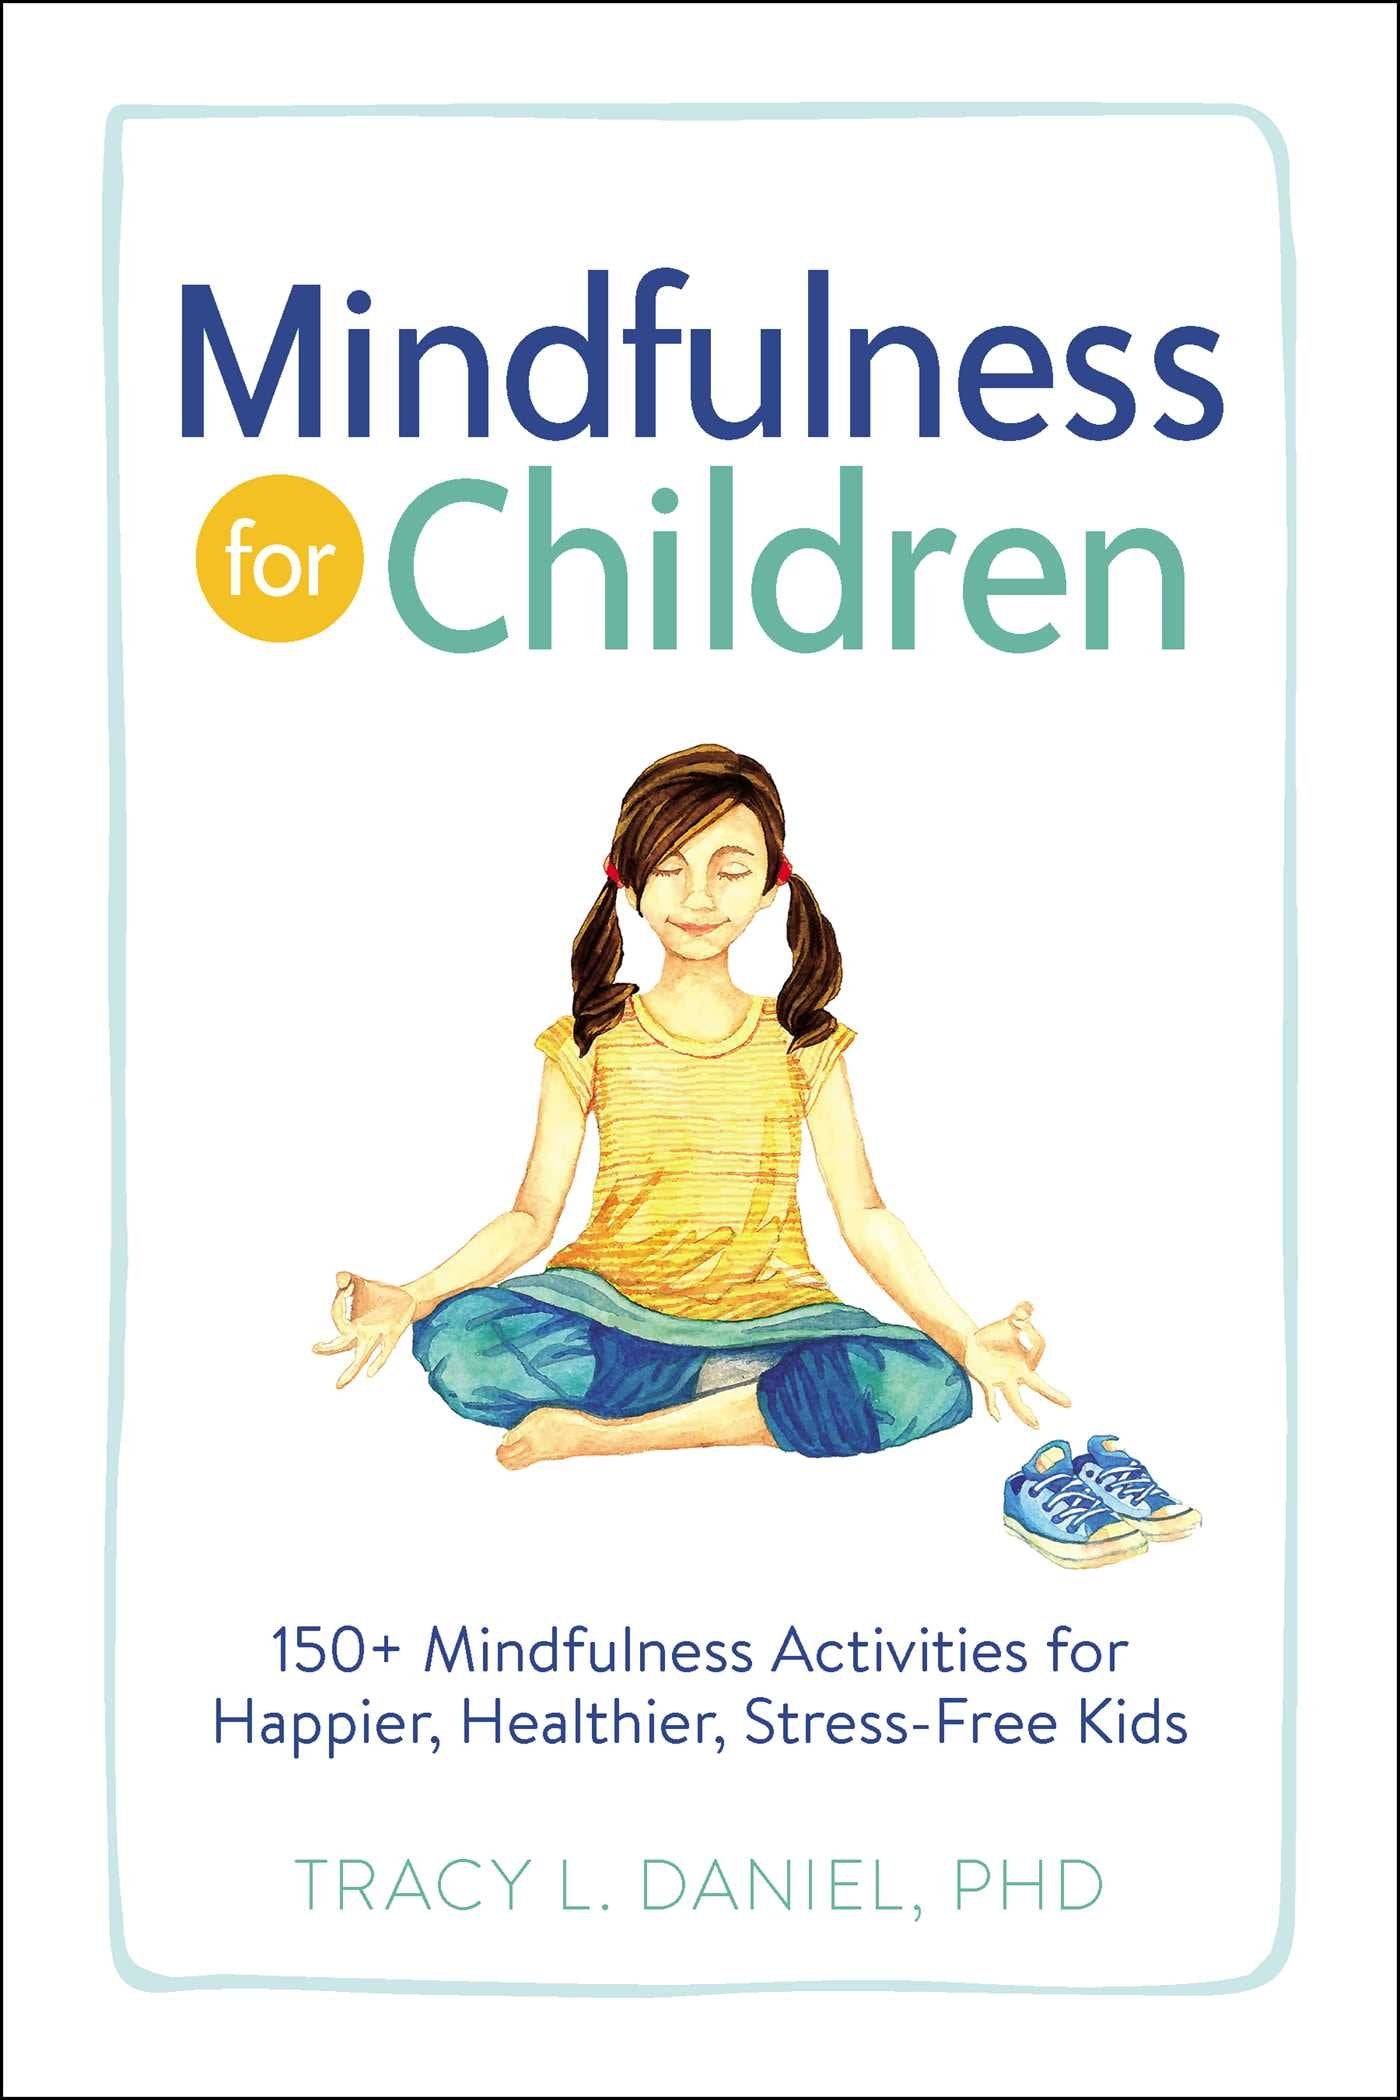 Mindfulness for Children: 150+ Mindfulness Activities for Happier, Healthier, Stress-Free Kids by Tracy Daniel